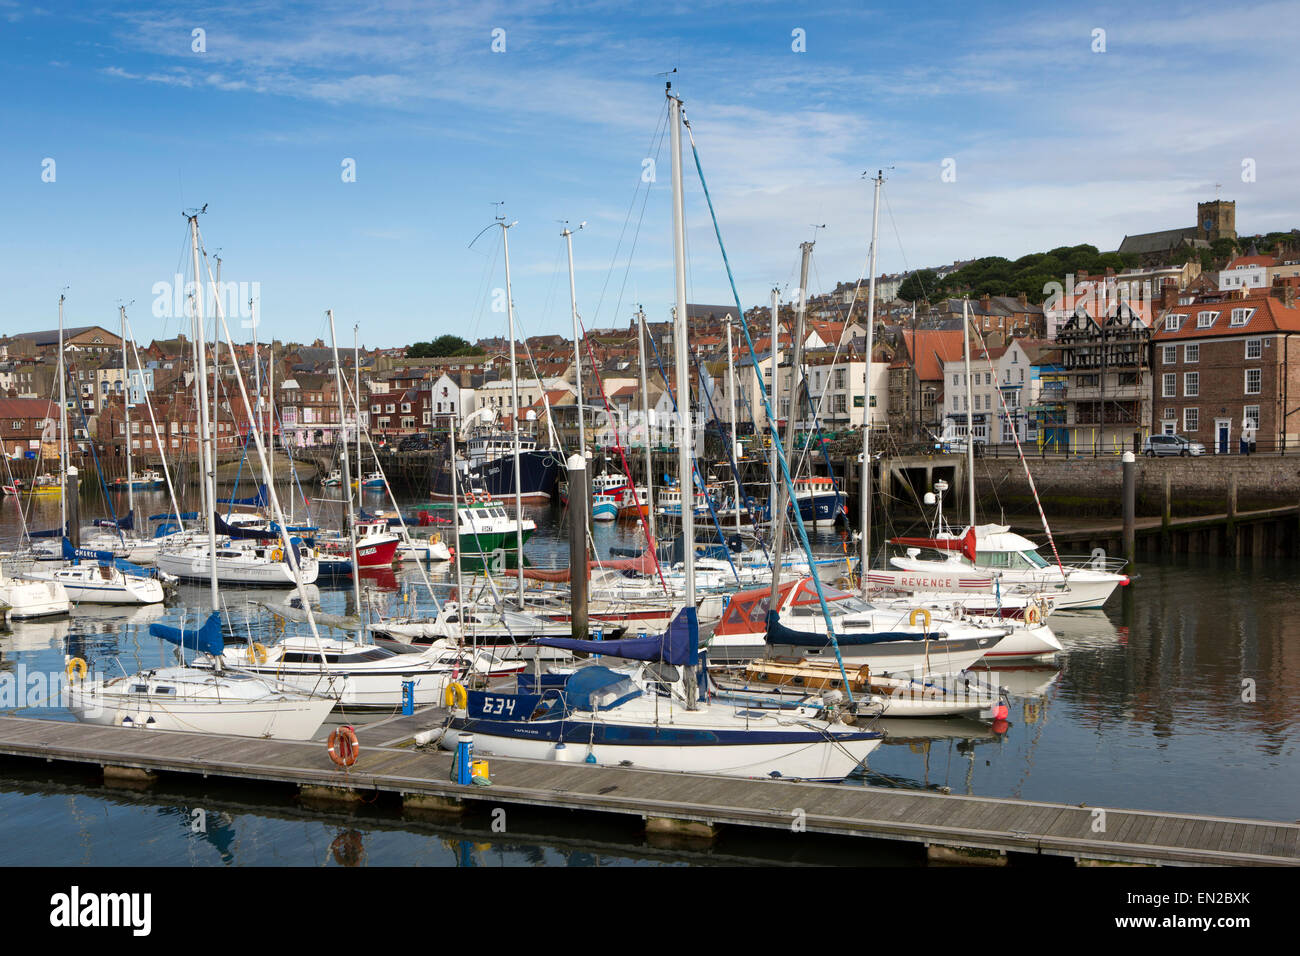 UK, England, Yorkshire, Scarborough, yachts moored at Old Harbour Albert Strange Pontoons from Vincent’s Pier Stock Photo